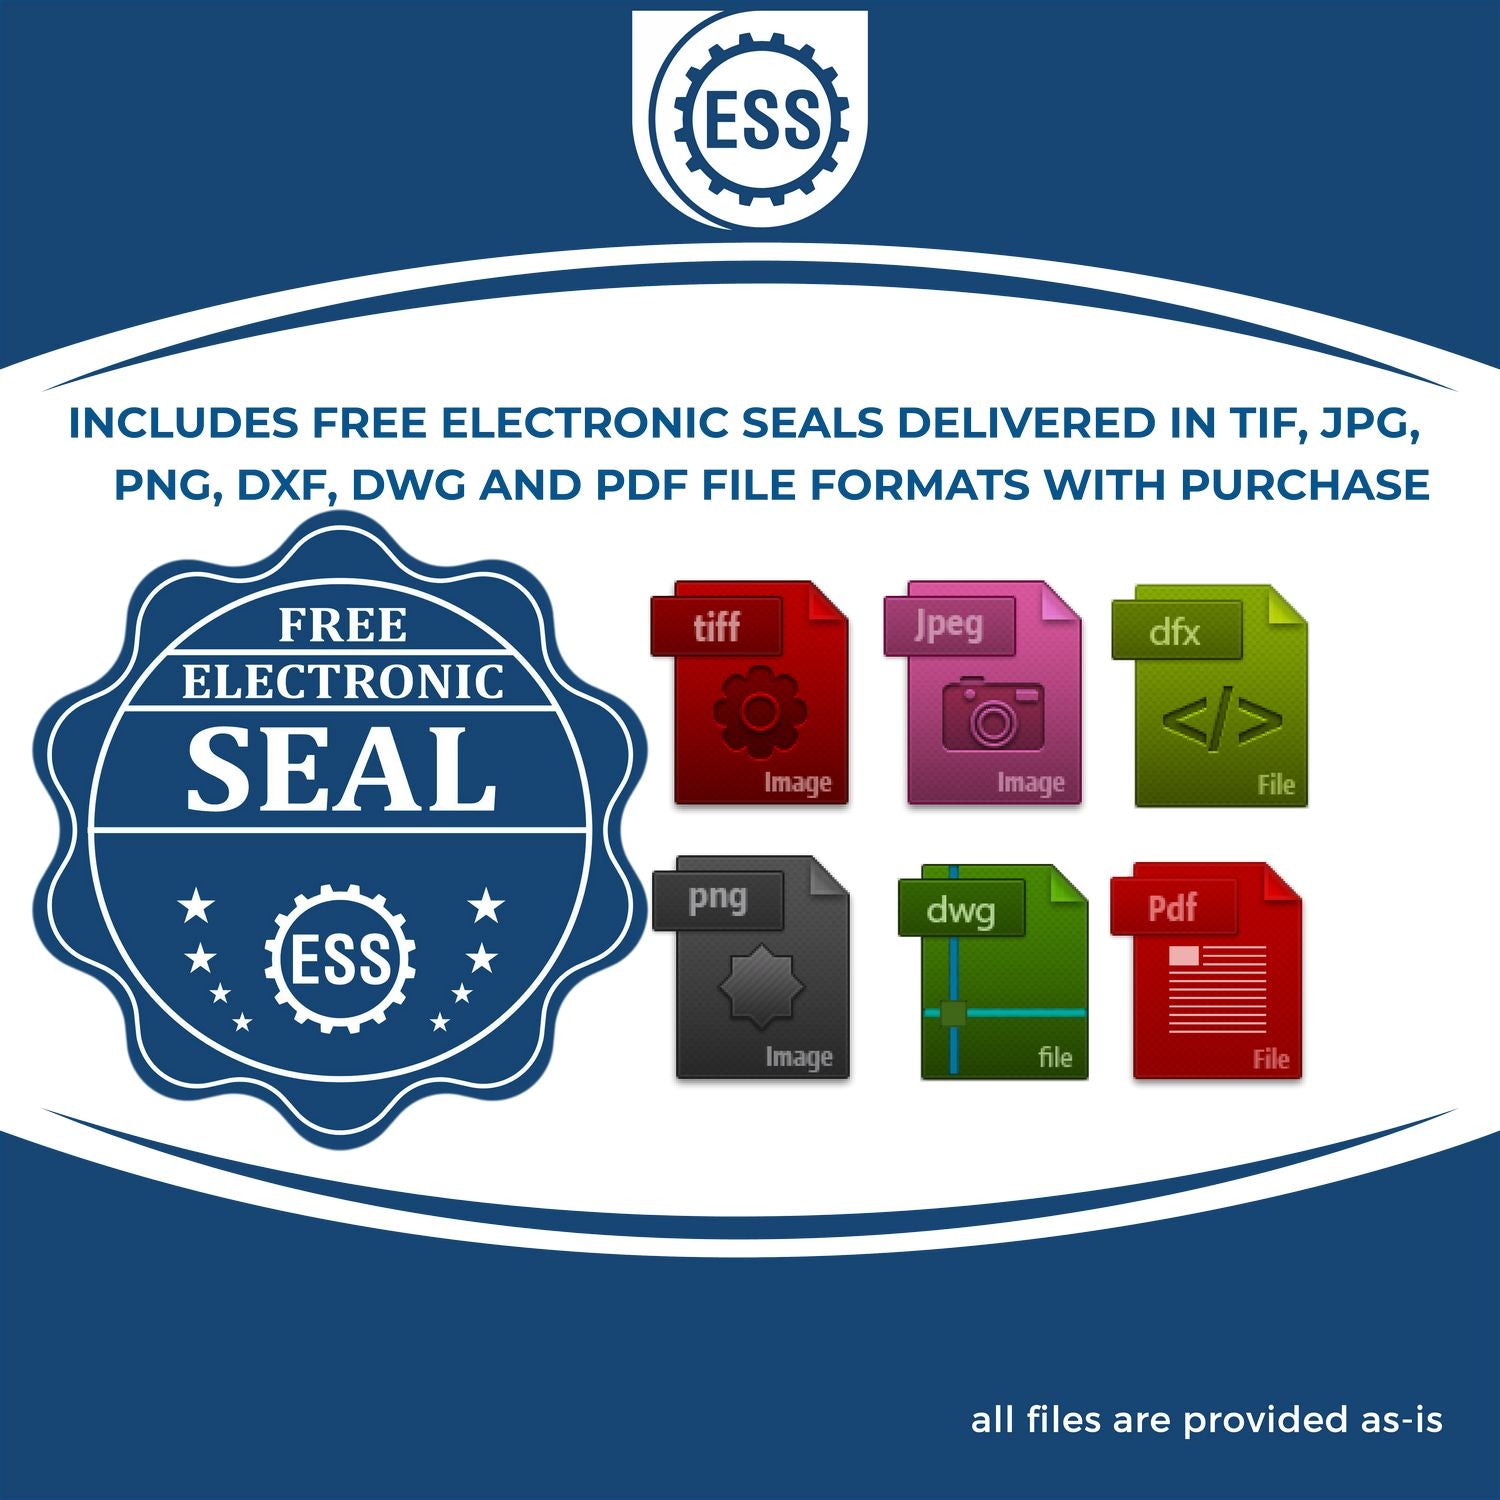 An infographic for the free electronic seal for the State of North Carolina Architectural Seal Embosser illustrating the different file type icons such as DXF, DWG, TIF, JPG and PNG.